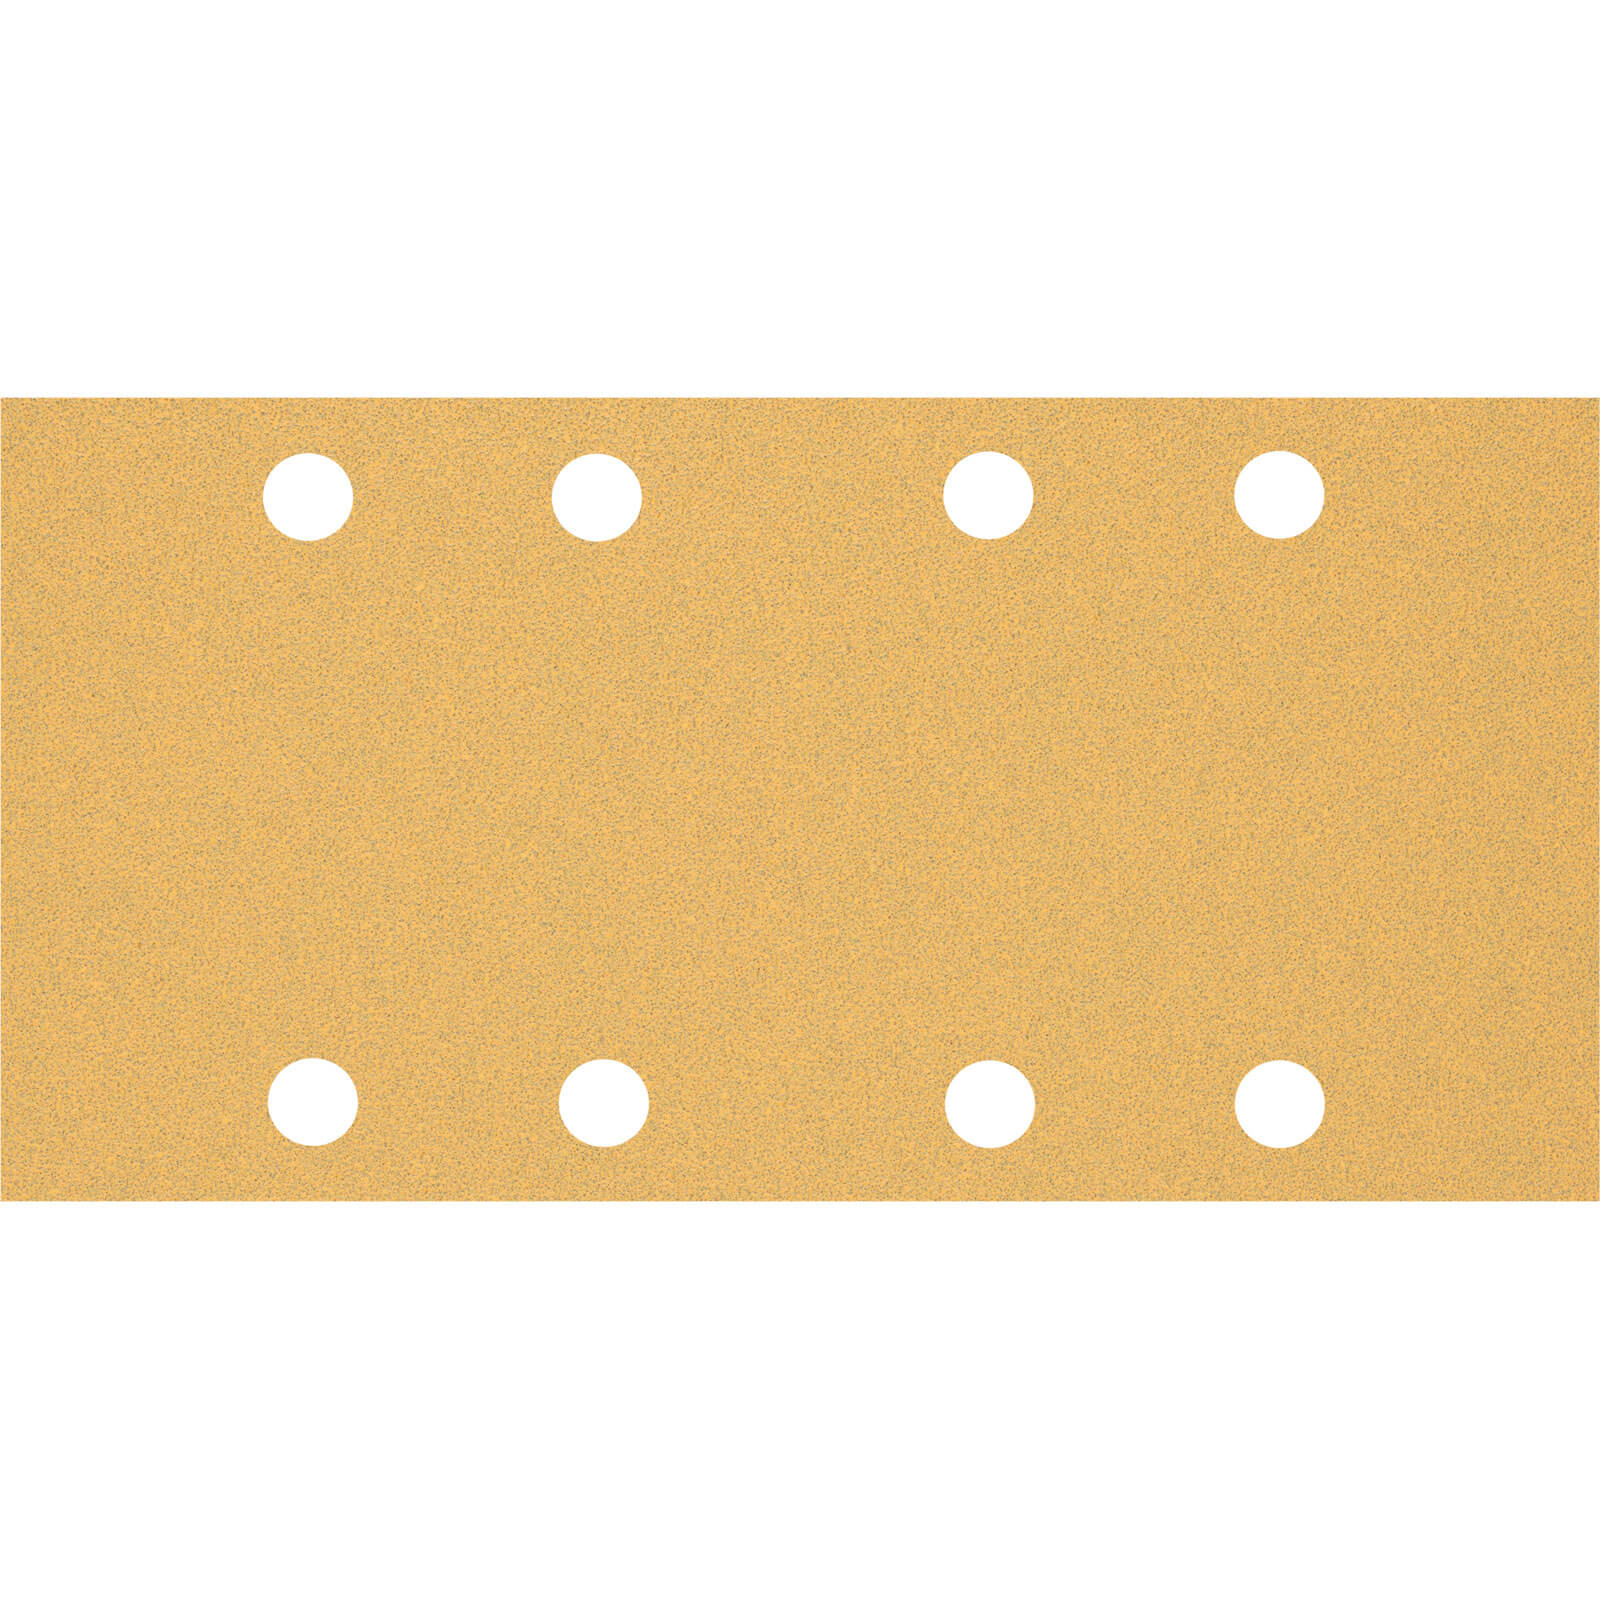 Image of Bosch Expert C470 Punched Hook and Loop Sanding Sheets 93mm x 186mm 80g Pack of 10